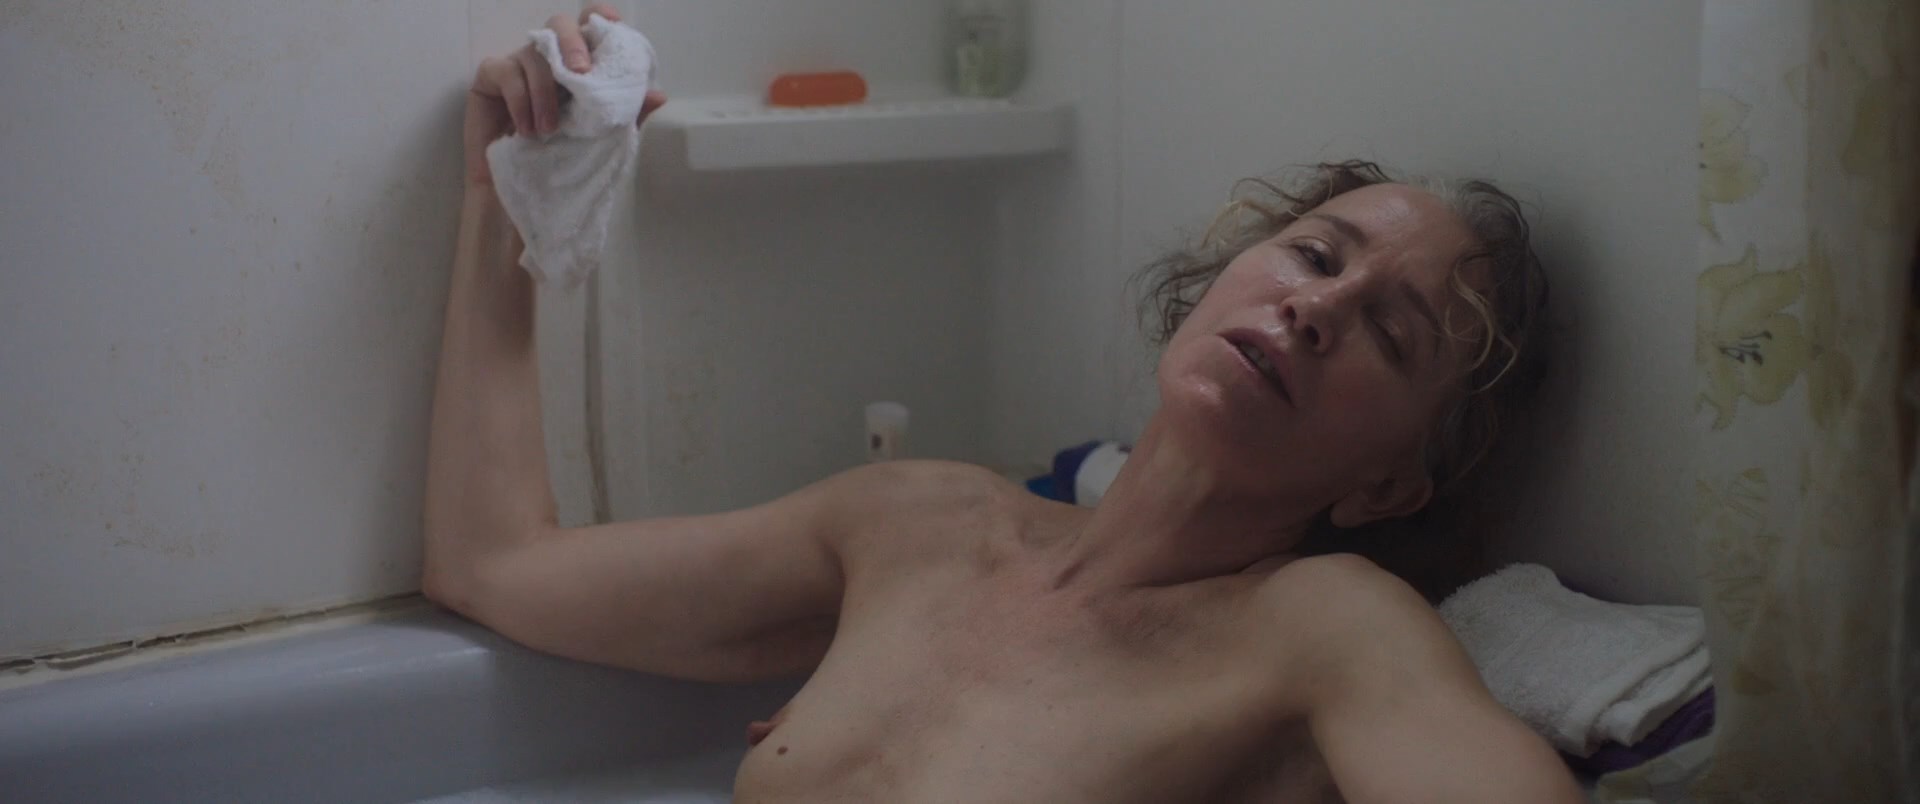 Felicity Huffman shows her itty bitty titty’s while taking a bath.